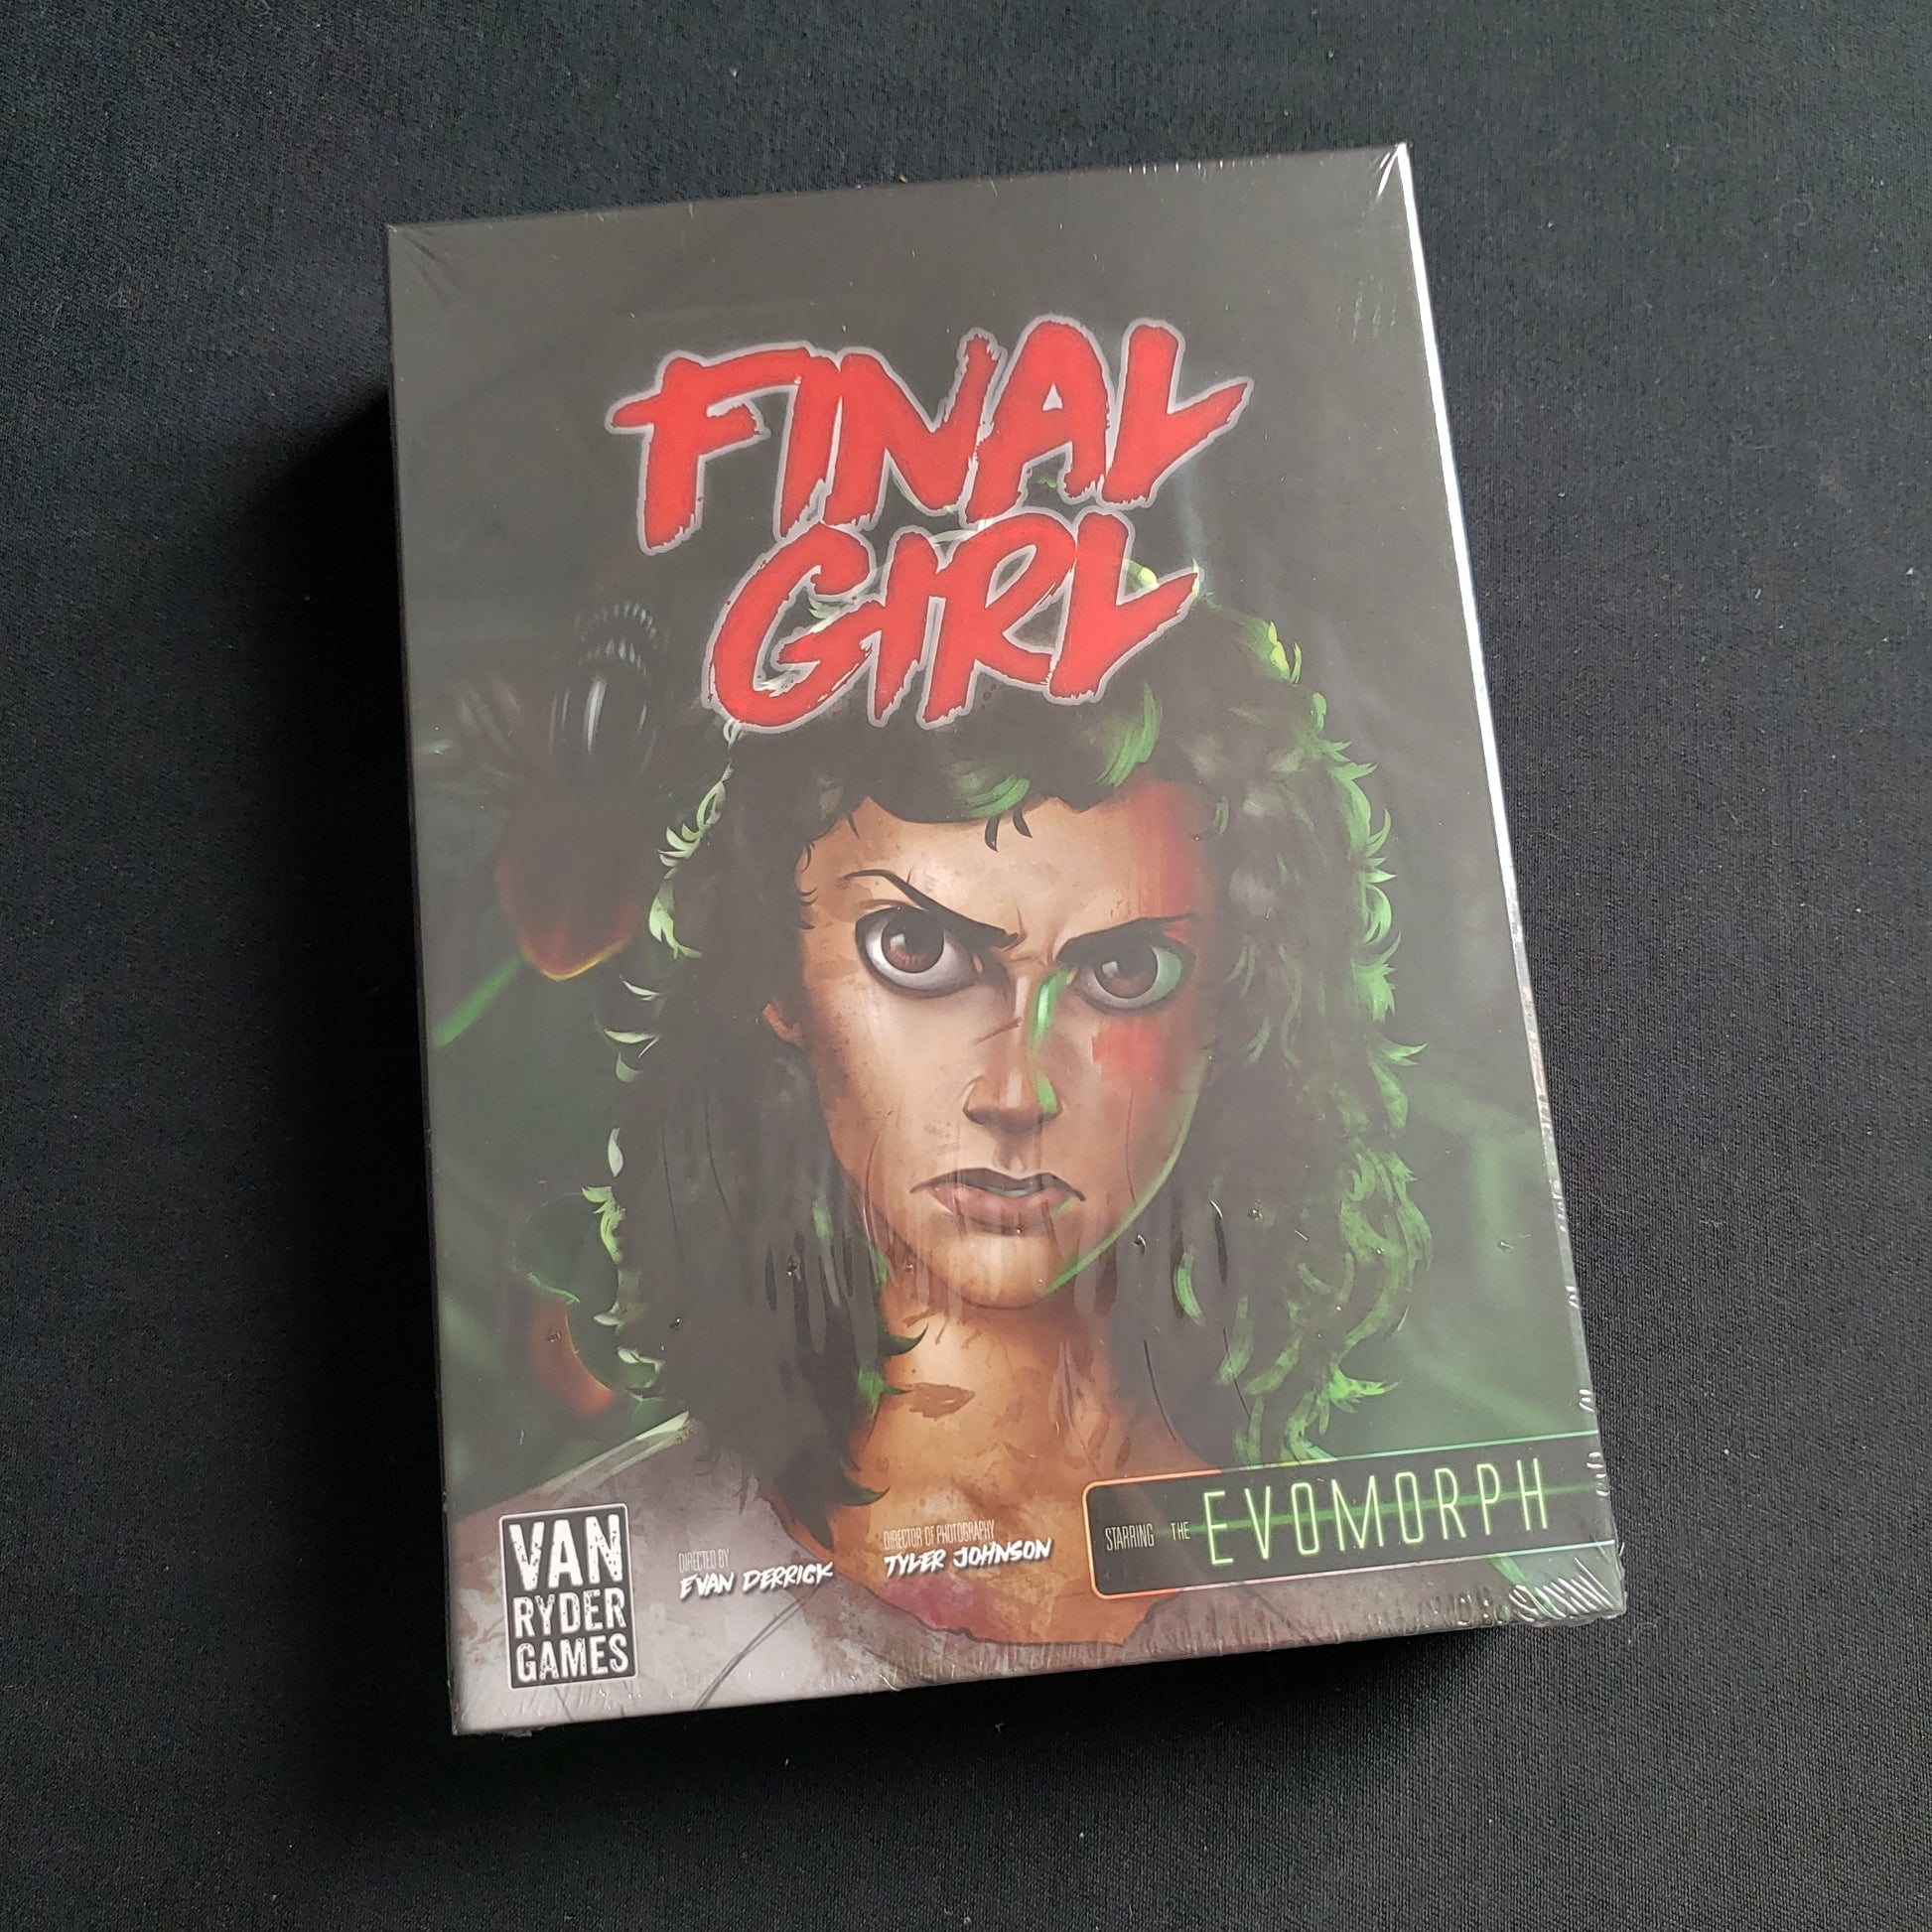 Image shows the front of the box for the Into the Void Feature Film Expansion for the Final Girl board game